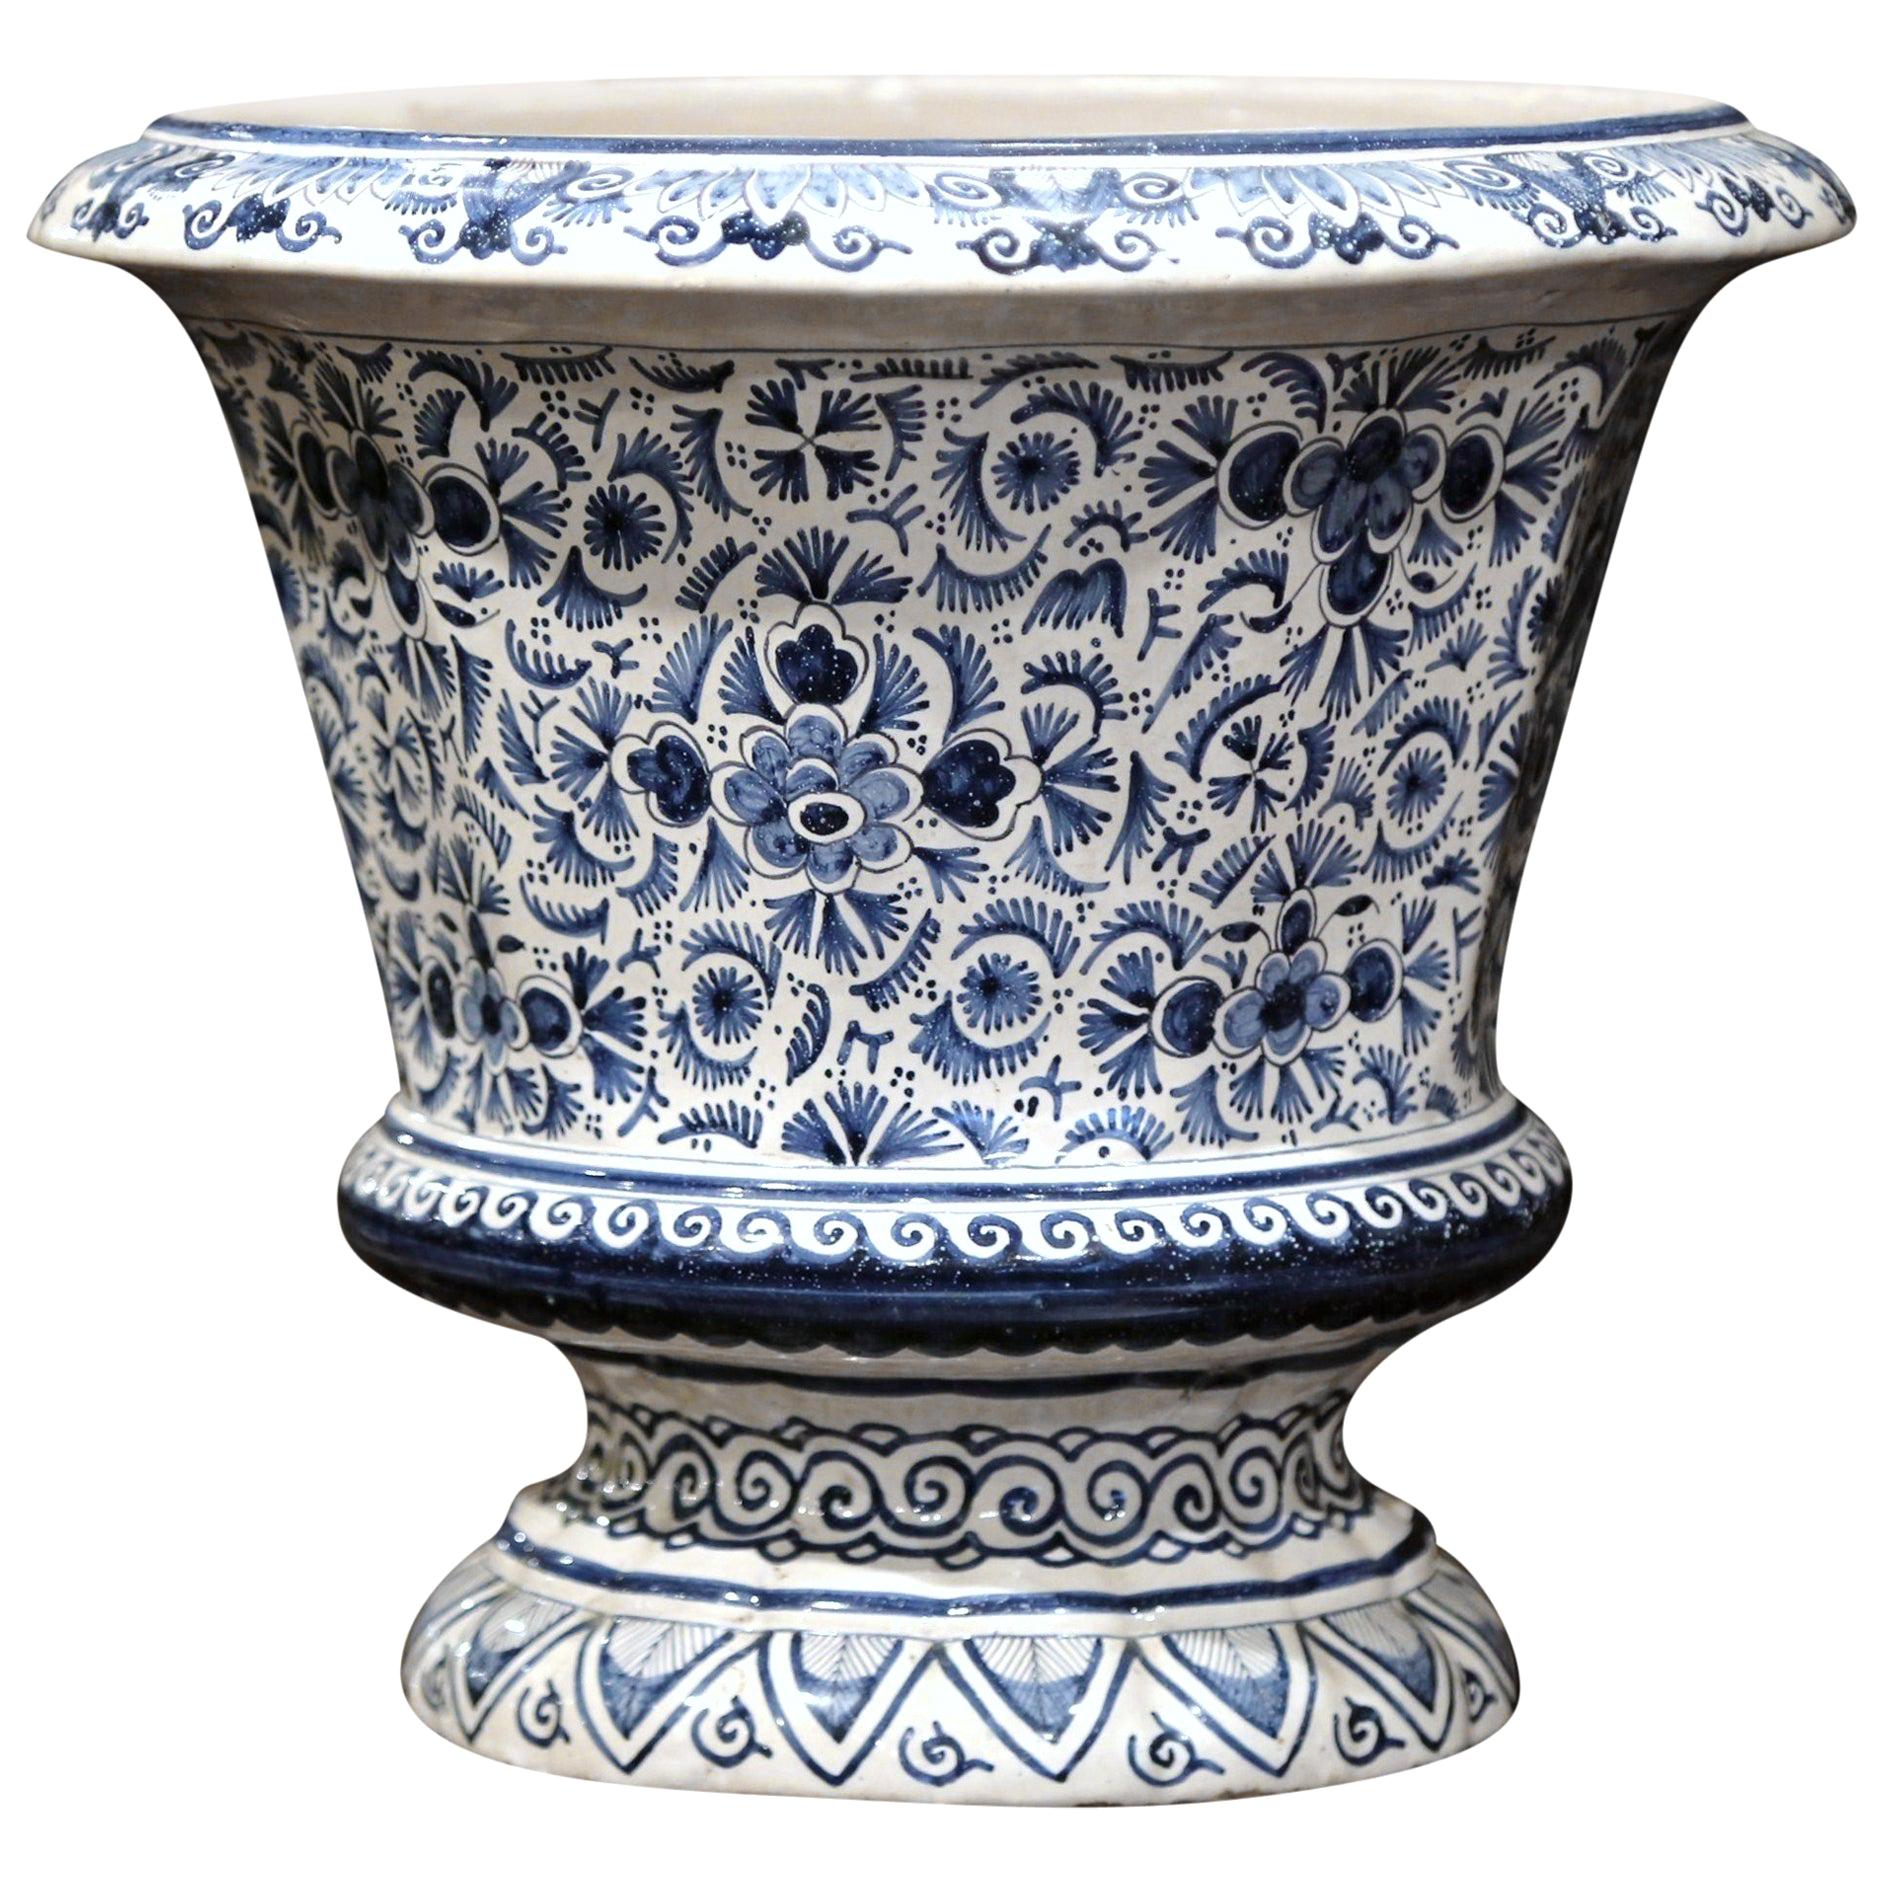 19th Century French Blue and White Faience Cache Pot with Floral Decor